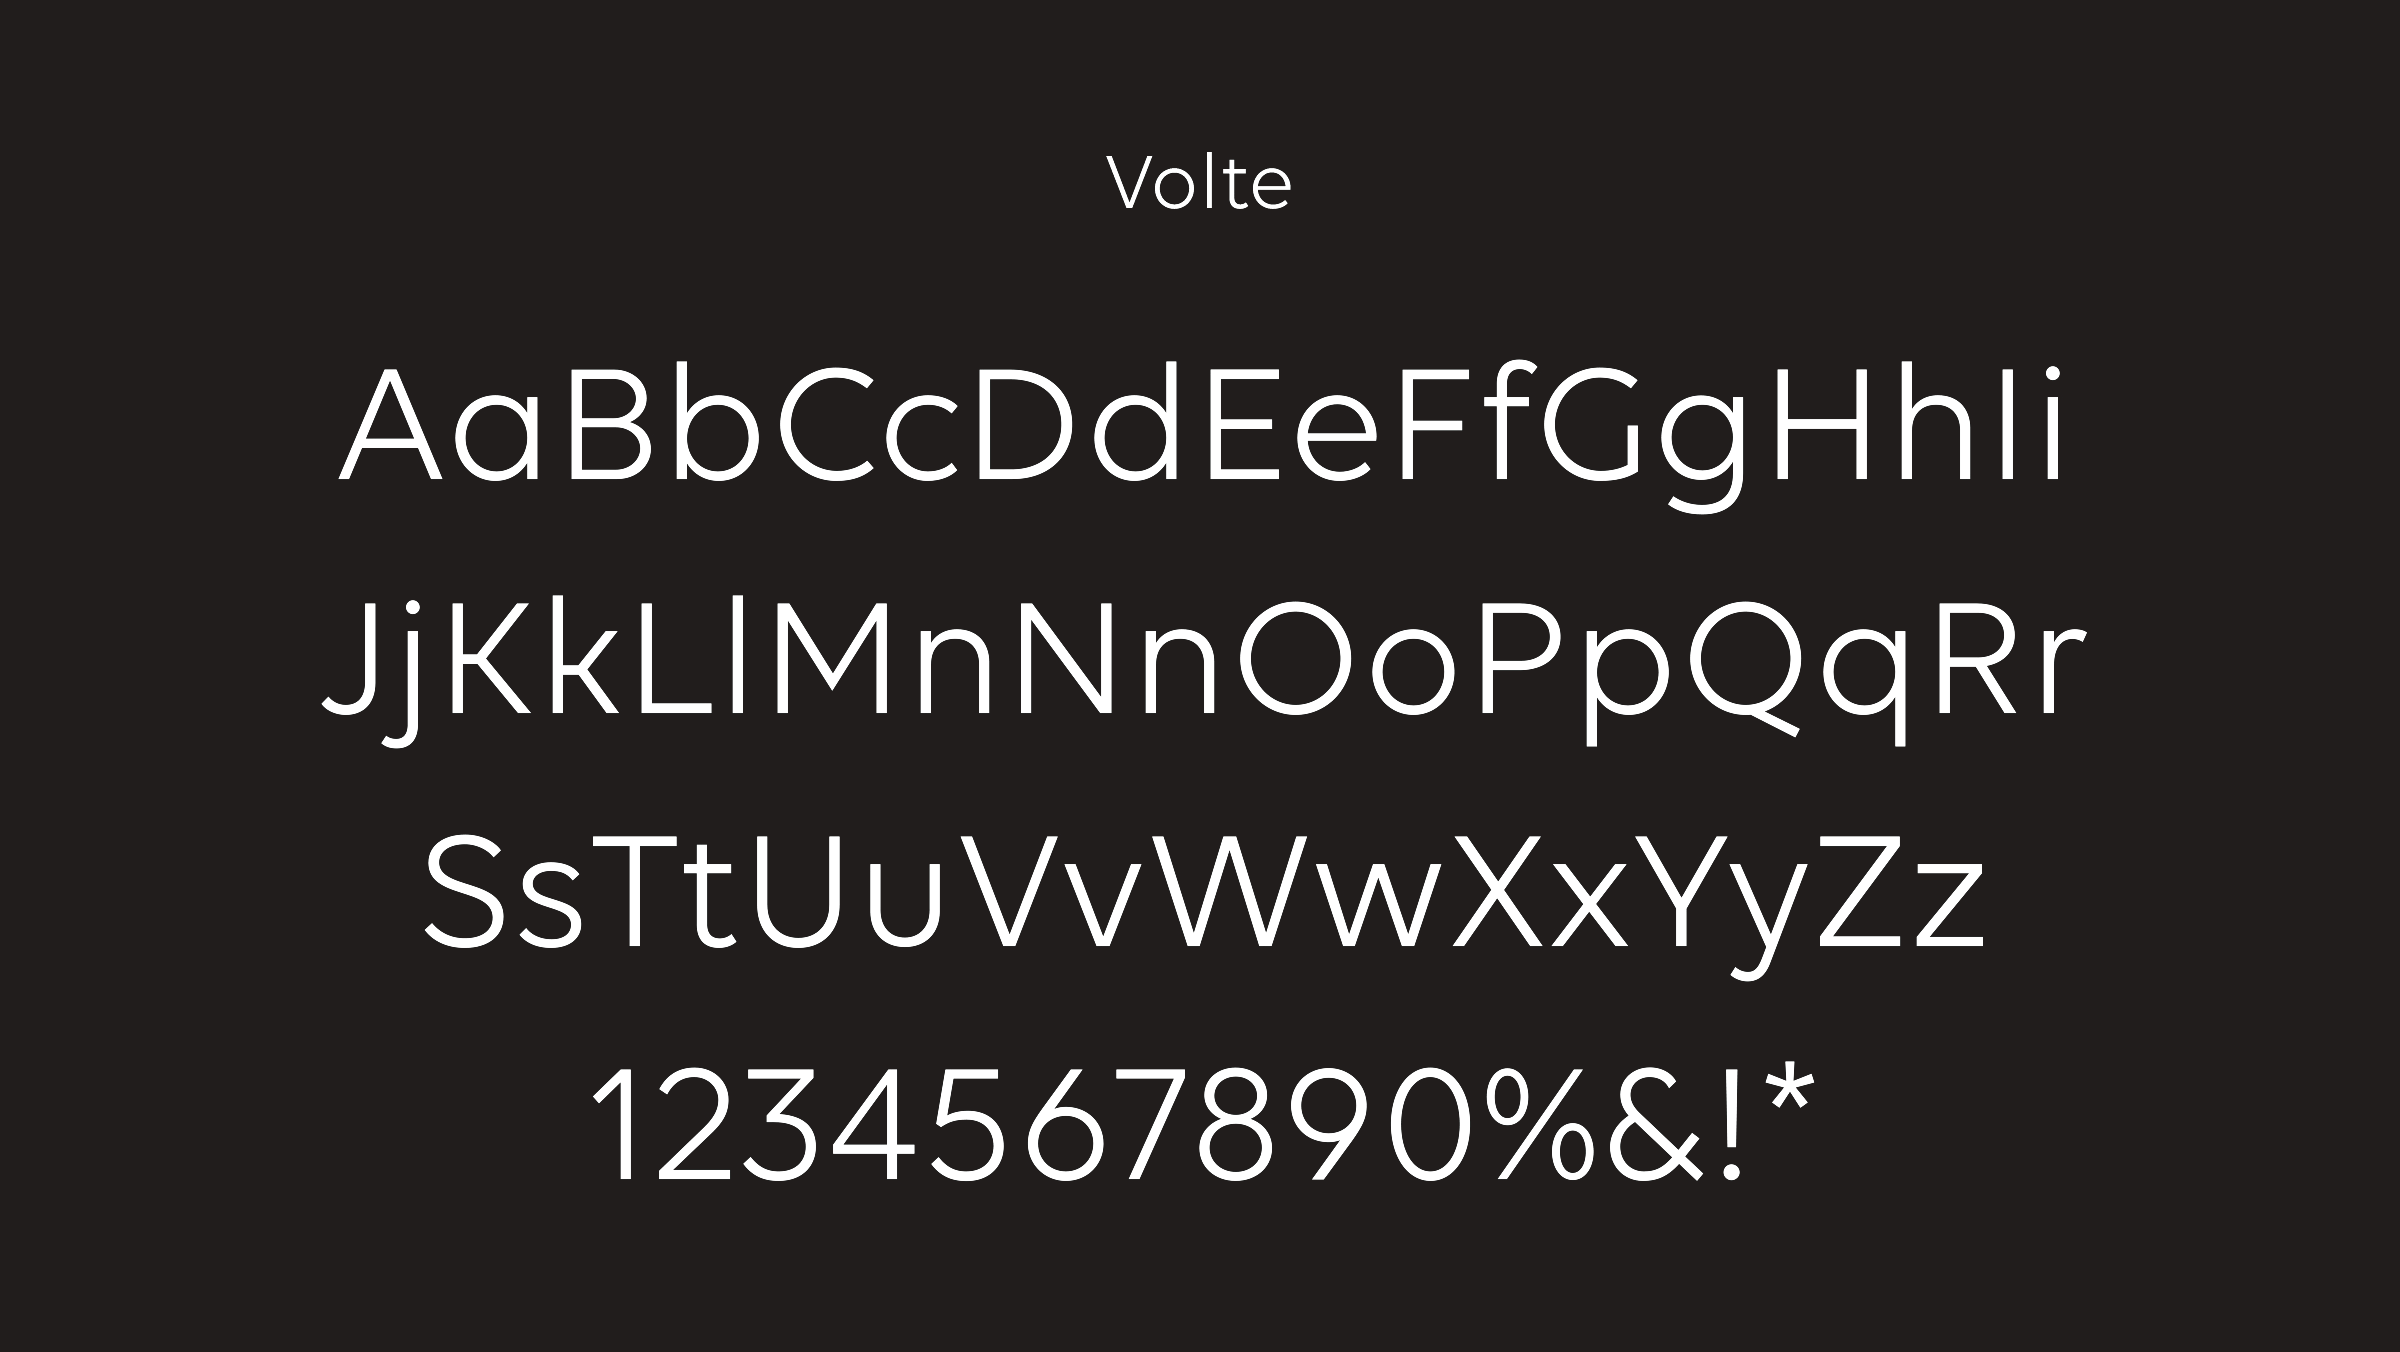 WP1-Font-Volte-Recovered